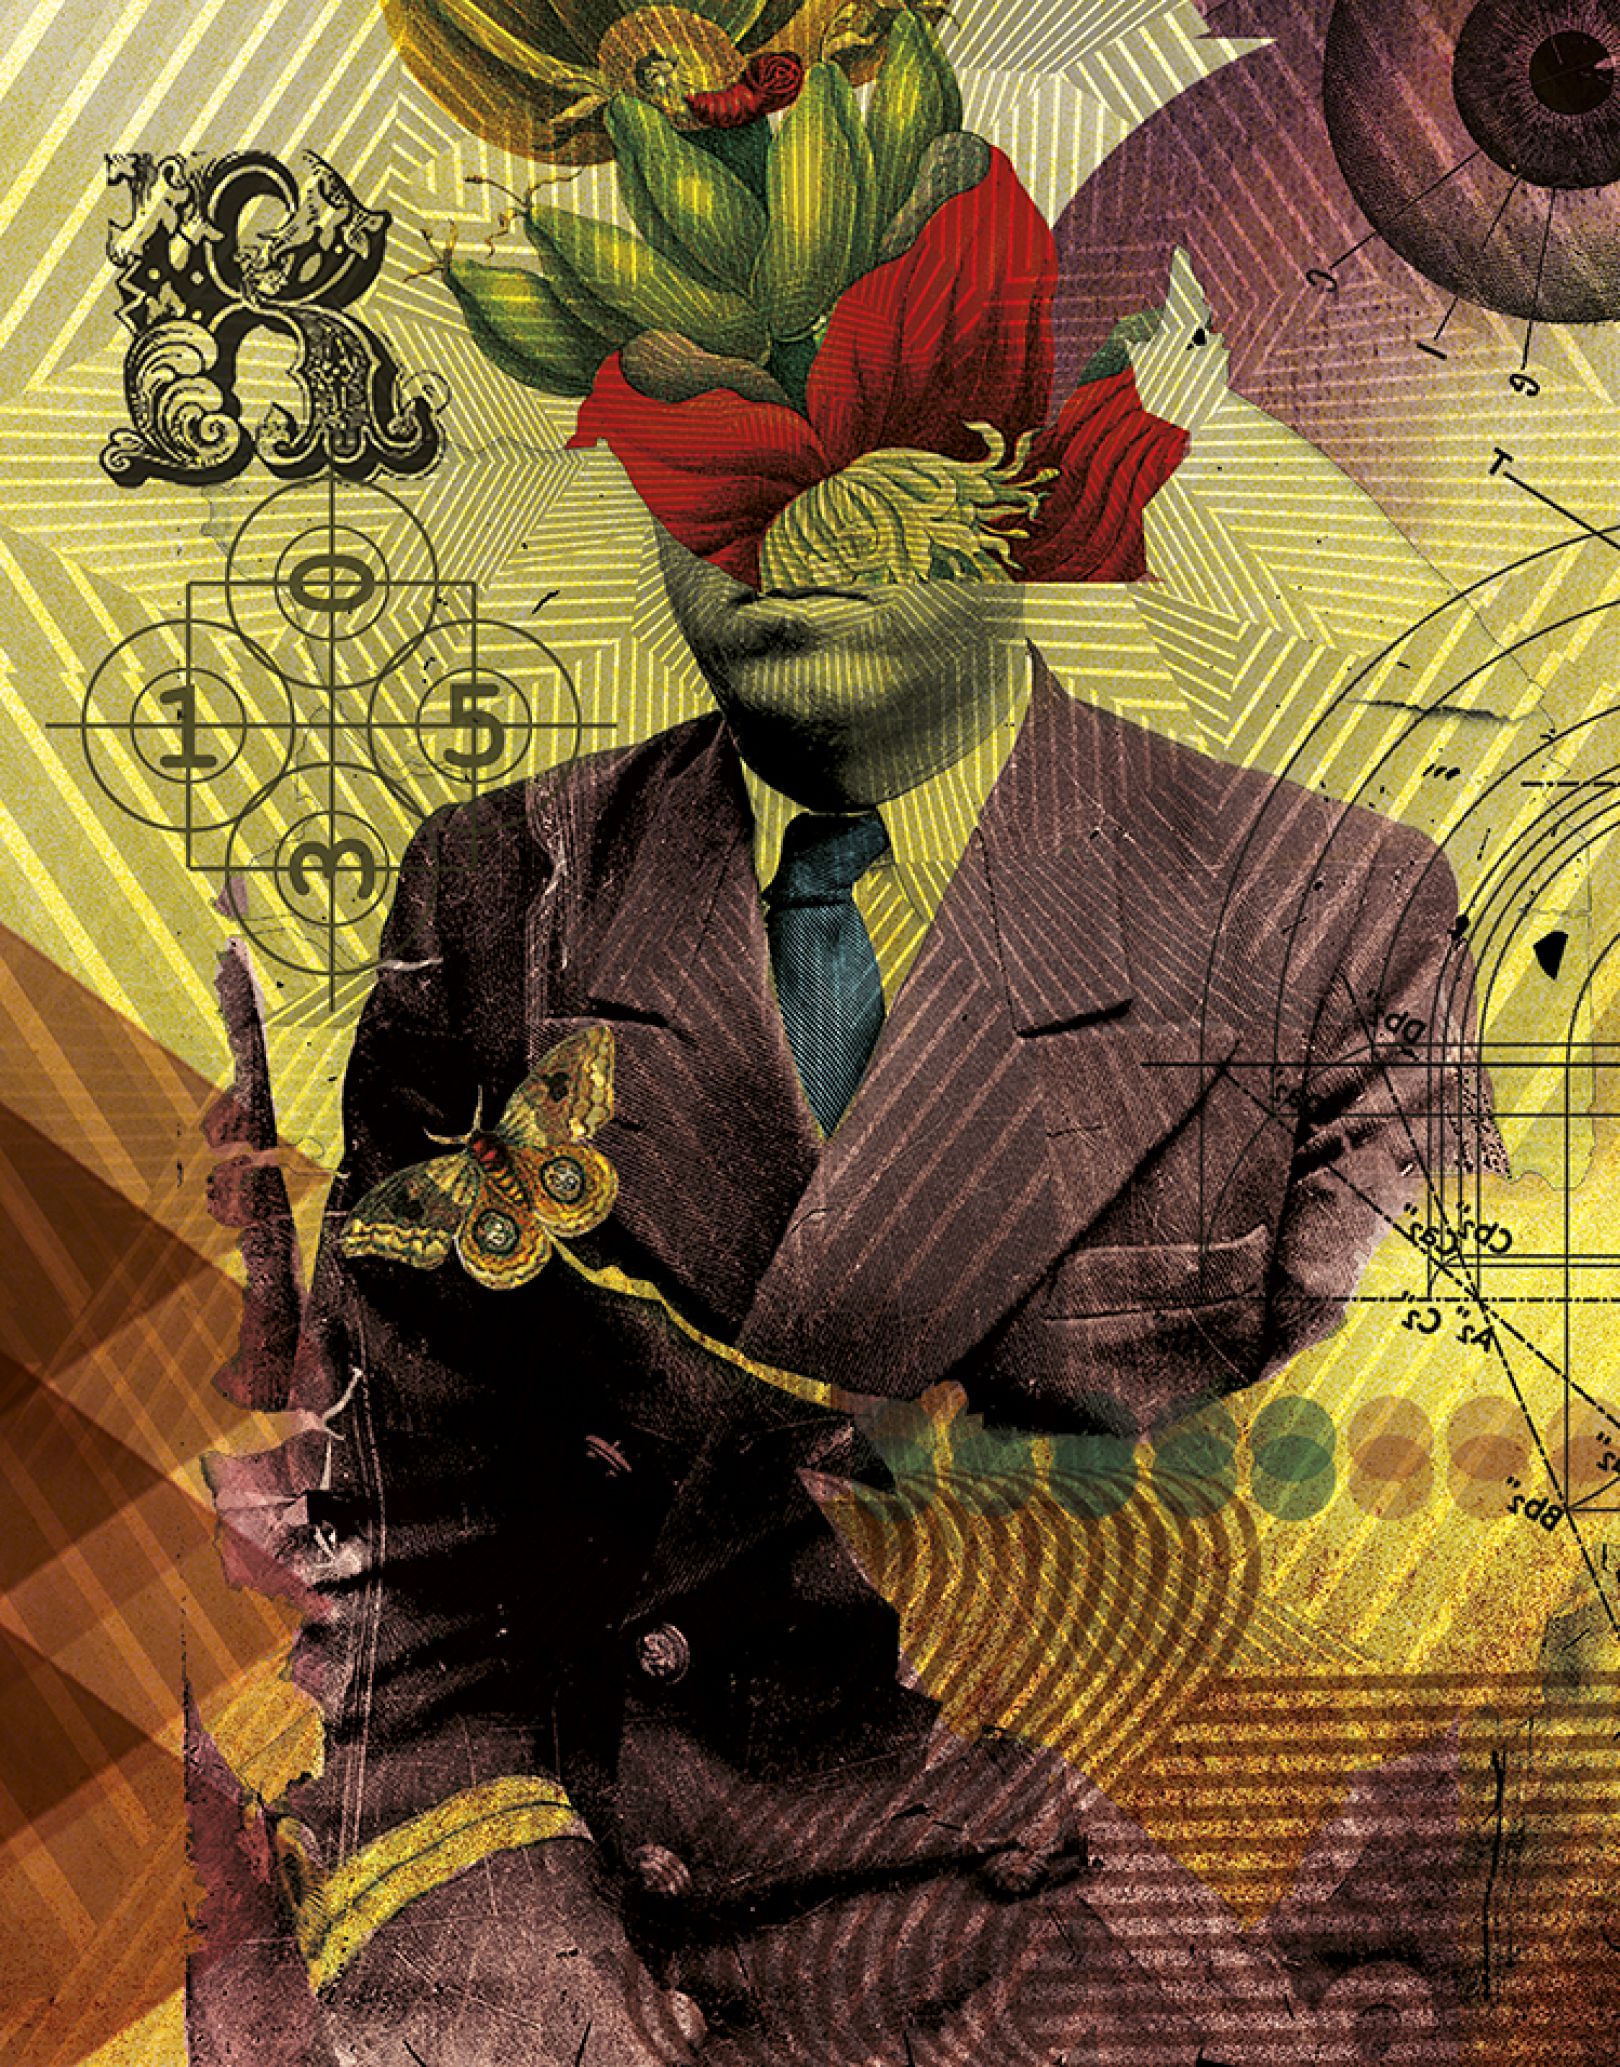 Bizarre collage art inspired by surrealism, the pop art movement and